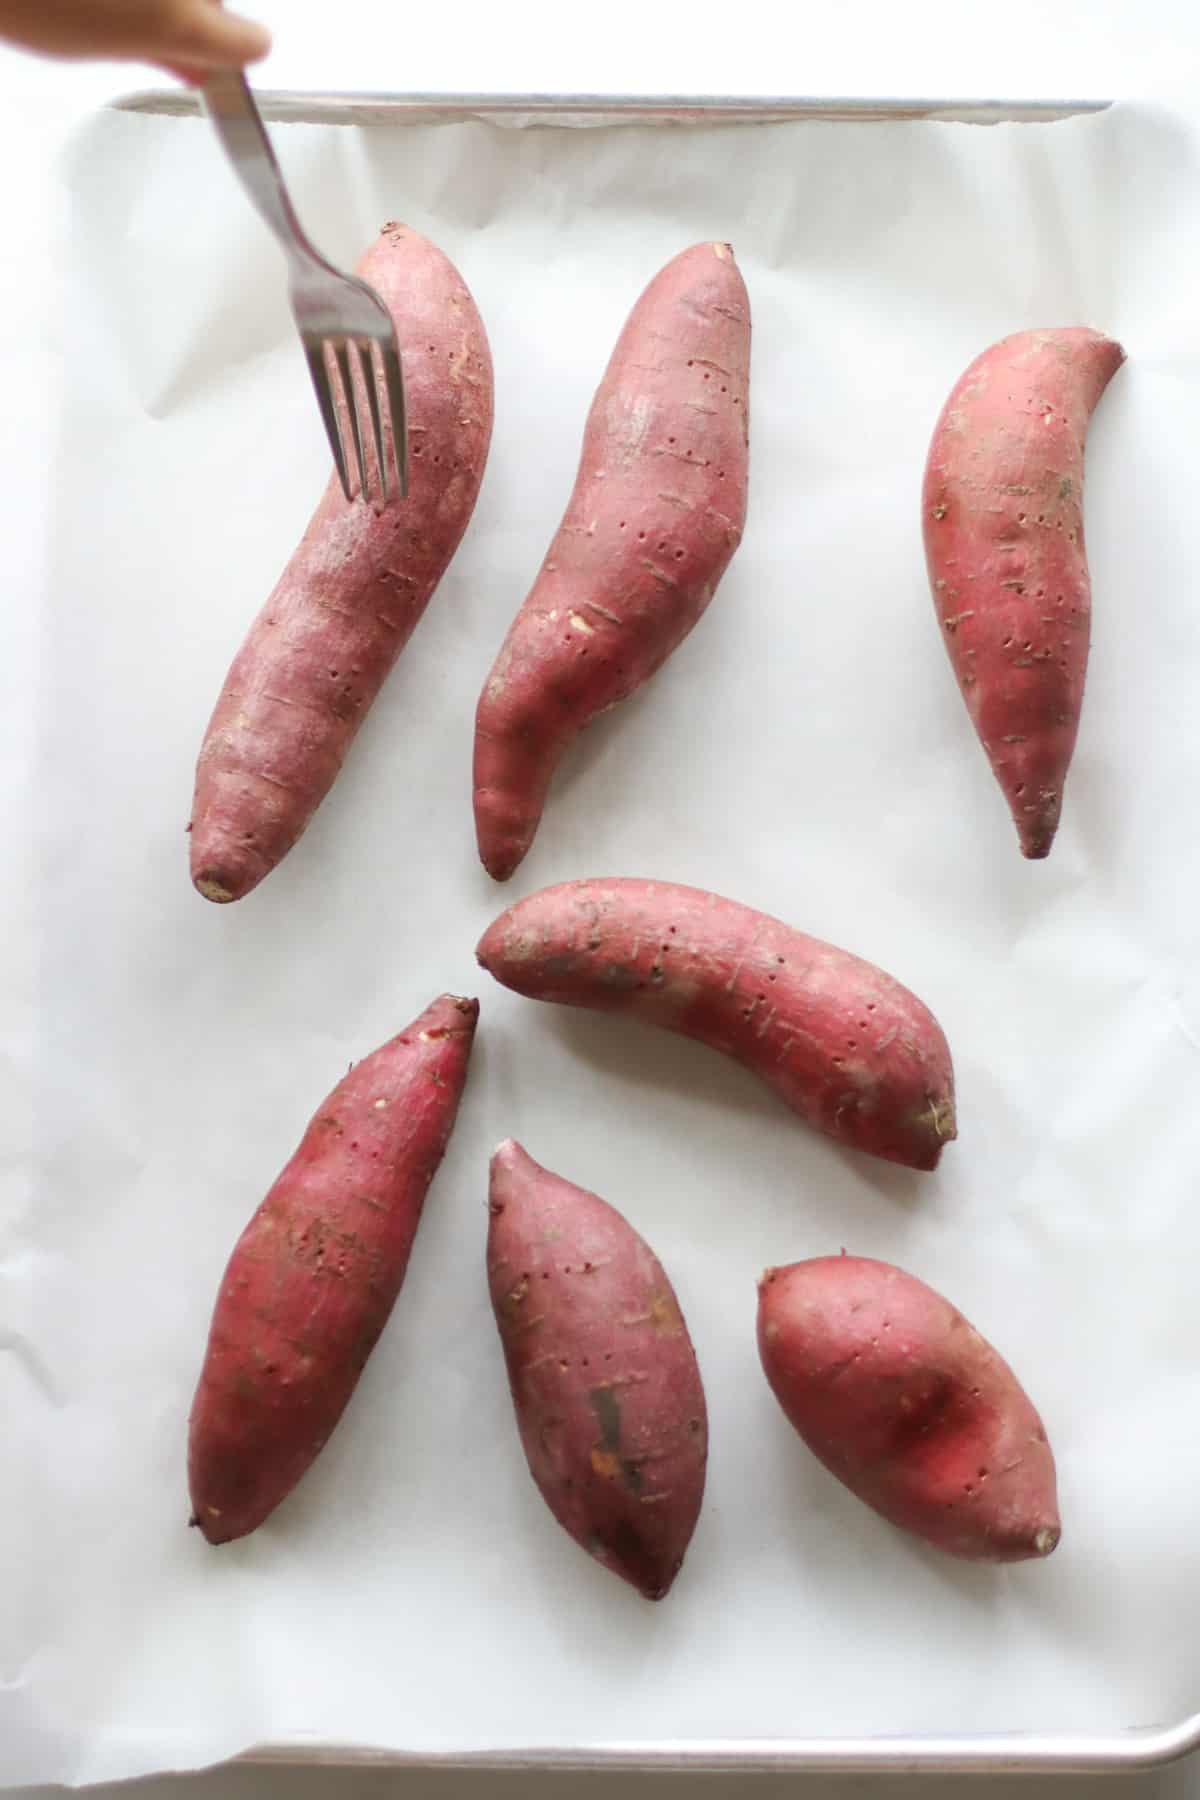 Sweet potatoes laid out on a lined baking sheet with a fork pierccing one.